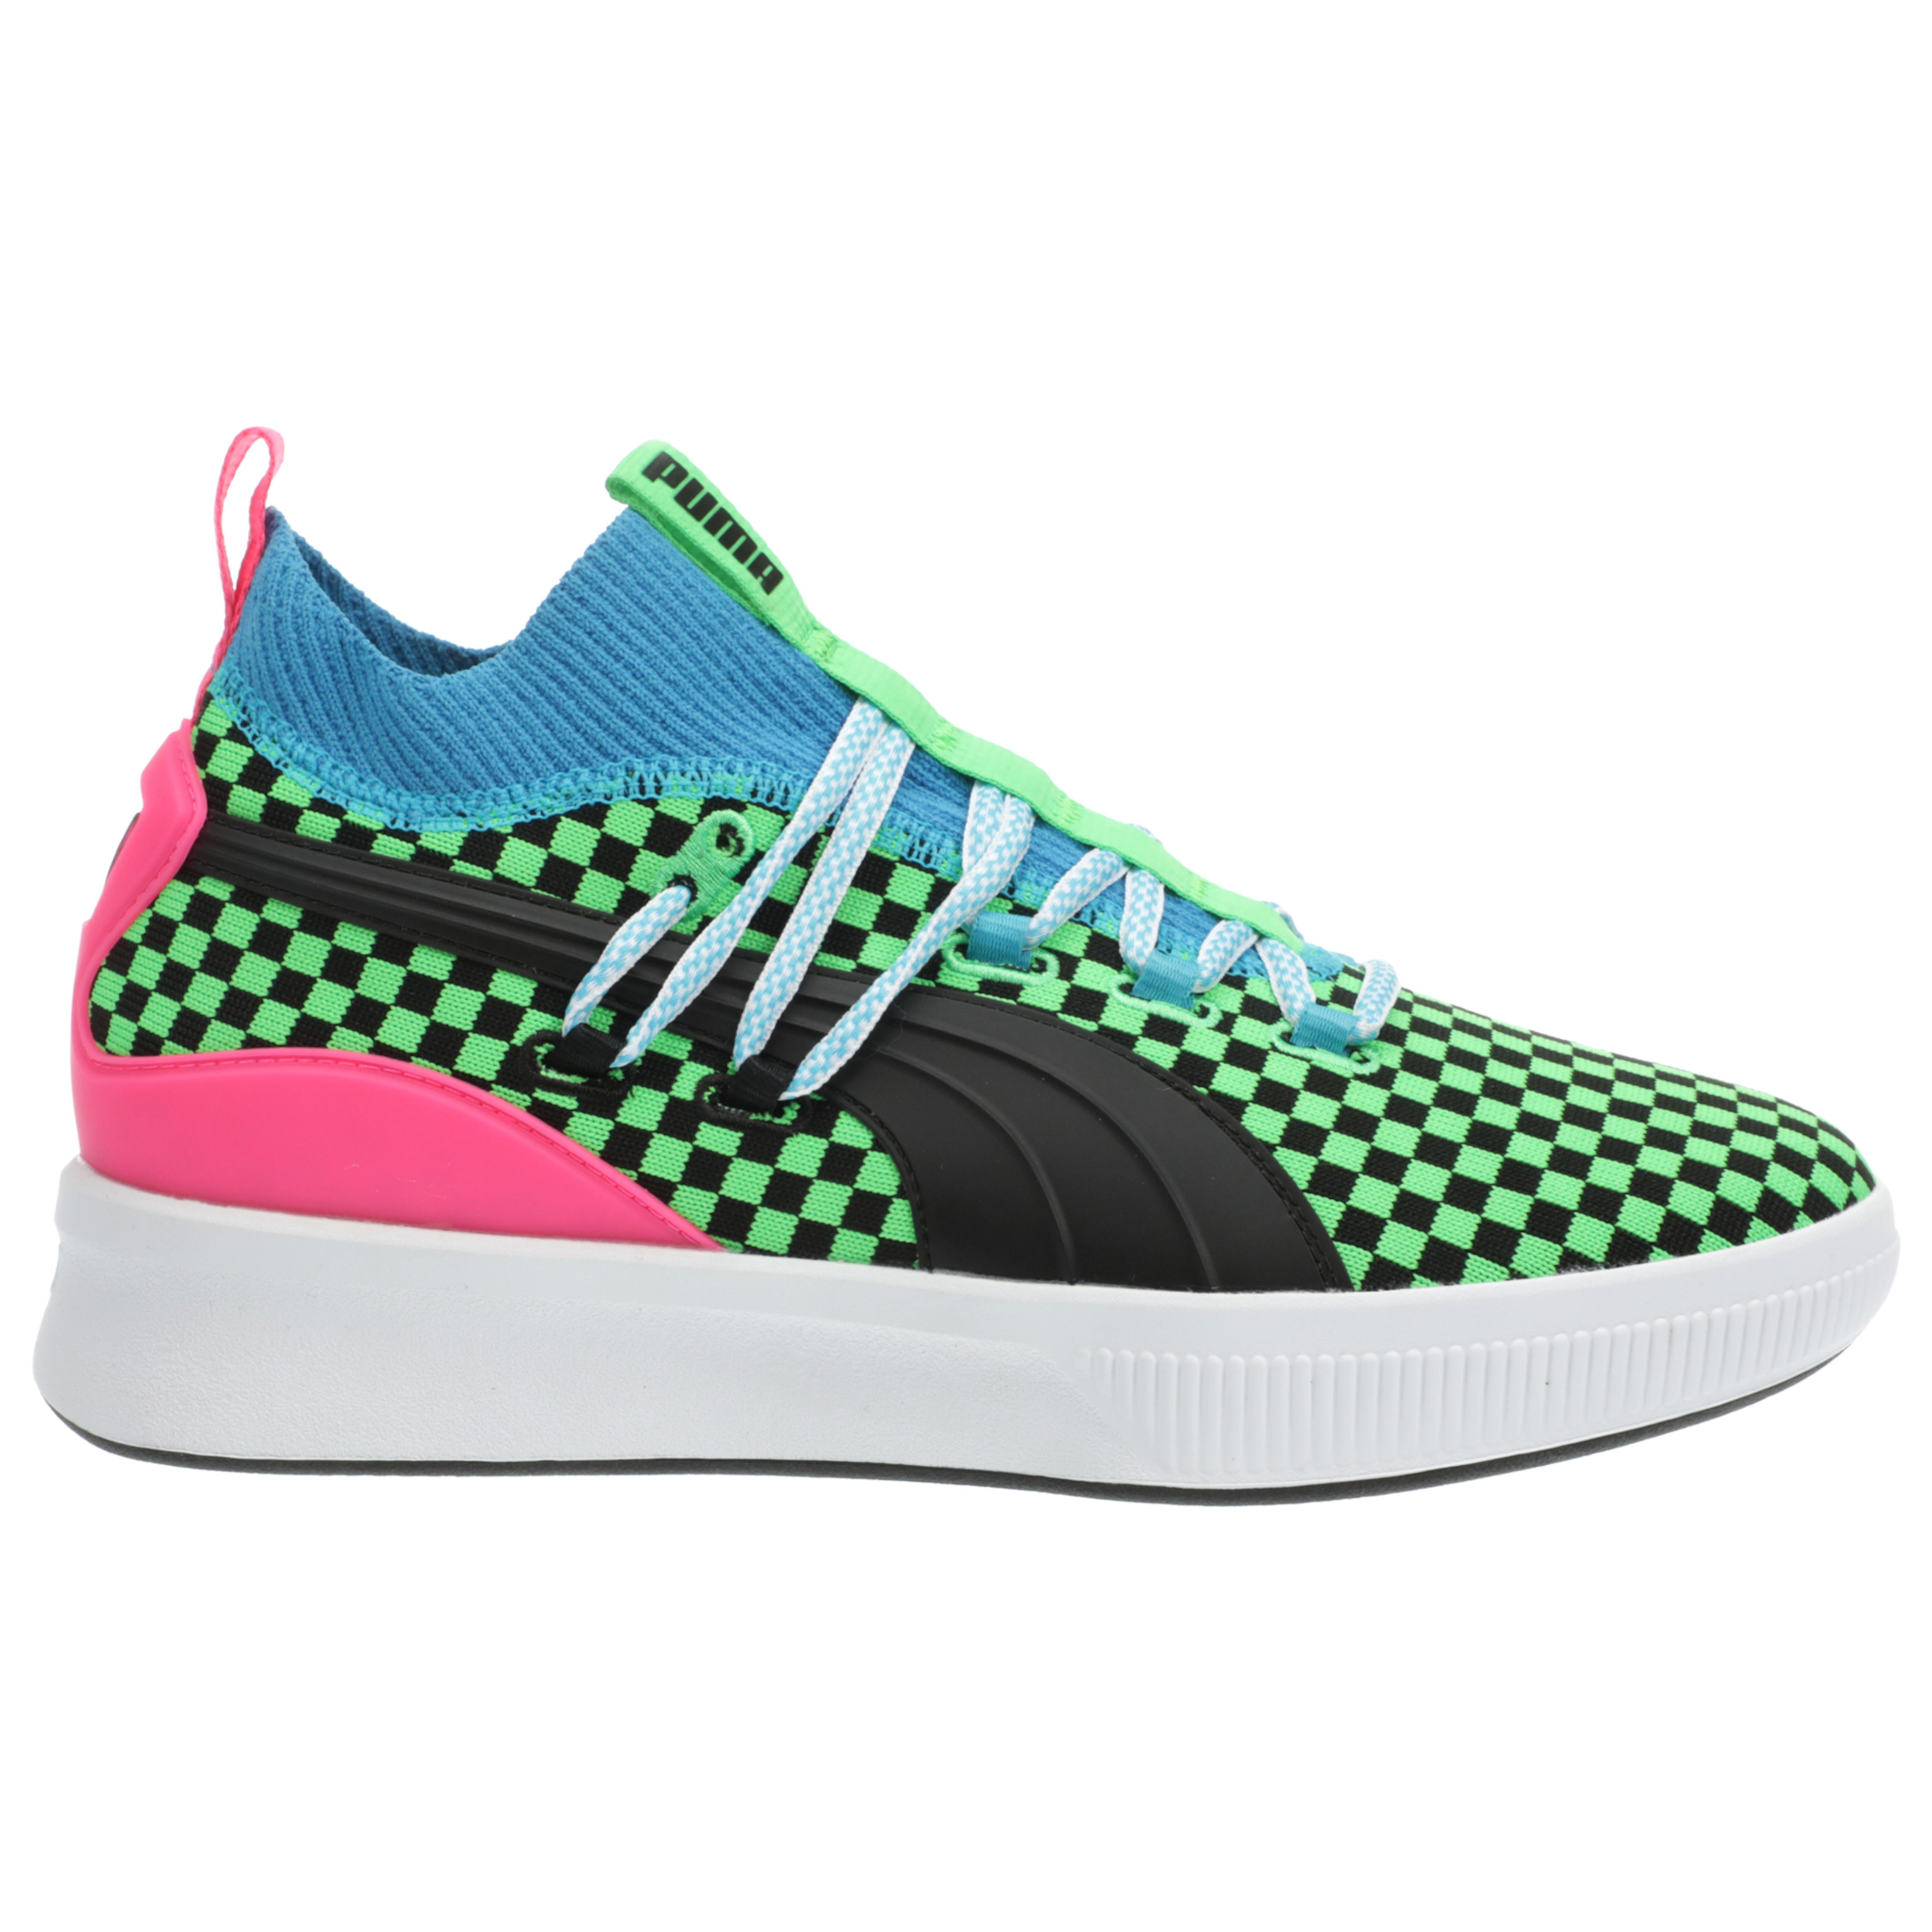 PUMA Rubber Clyde Court - Basketball Shoes in Green for Men - Lyst